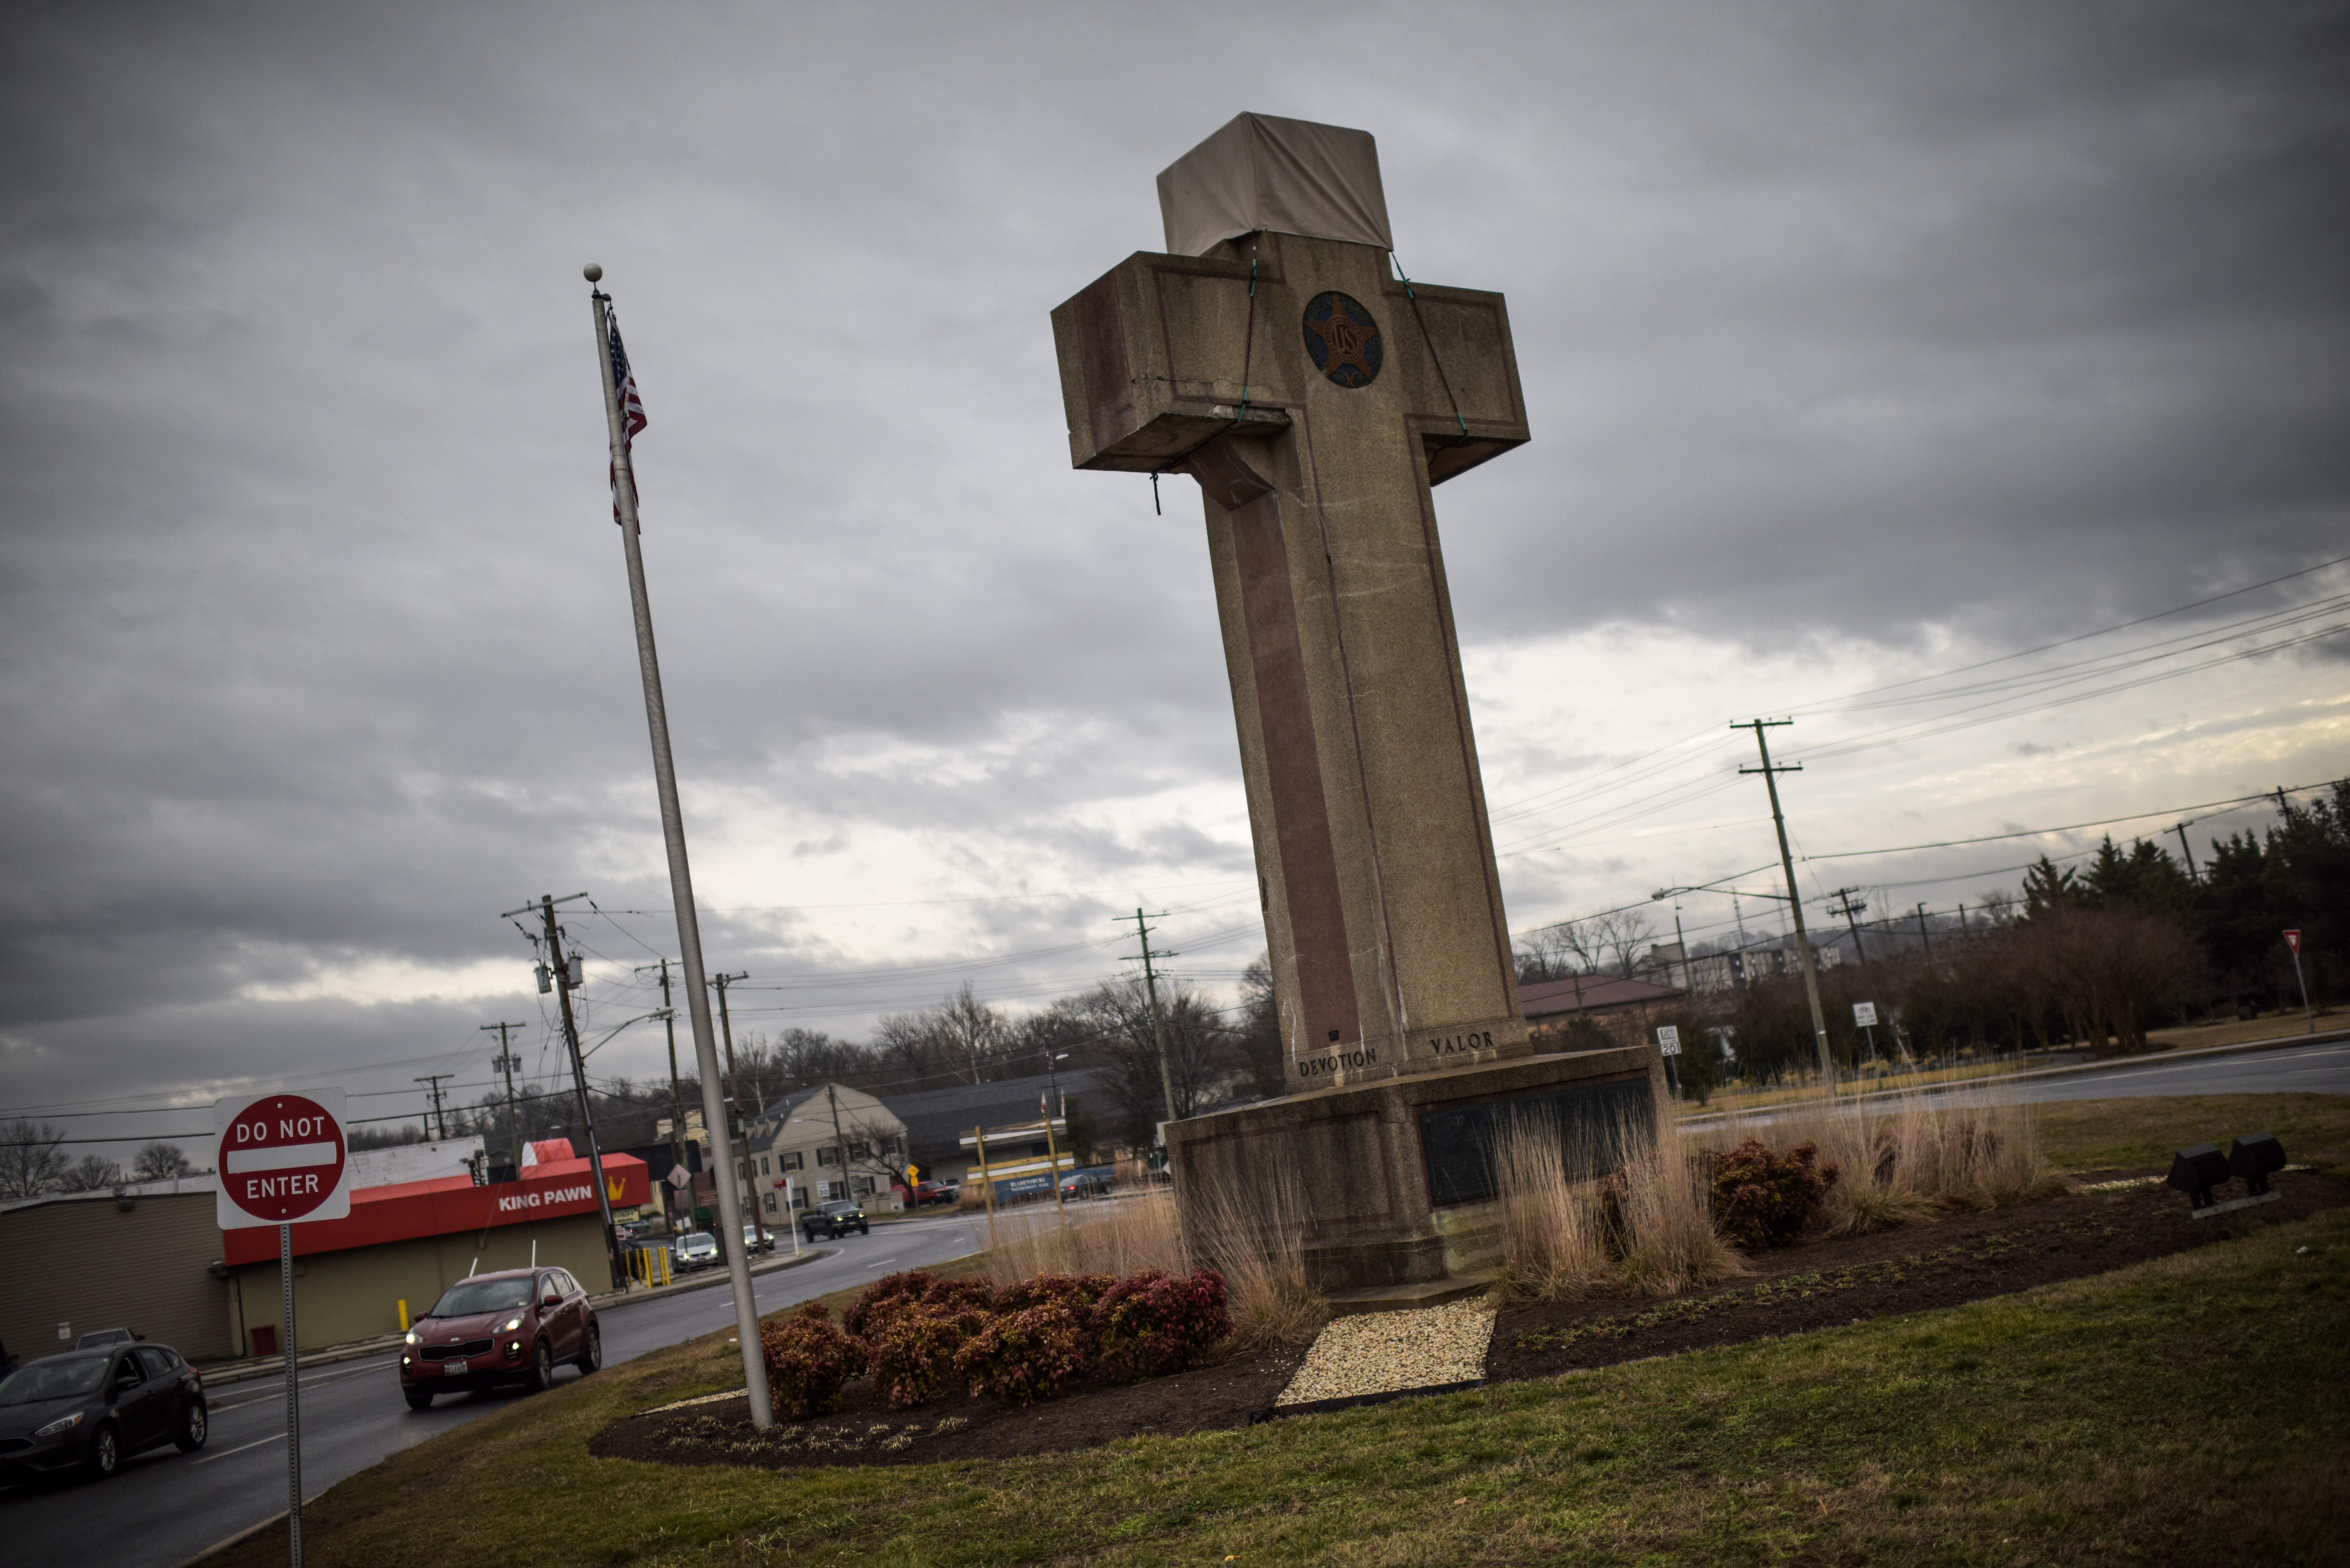 The World War I memorial cross in Bladensburg, Maryland -- near the nation's capital Washington -- is seen on February 08, 2019. (ERIC BARADAT/AFP/Getty Images)